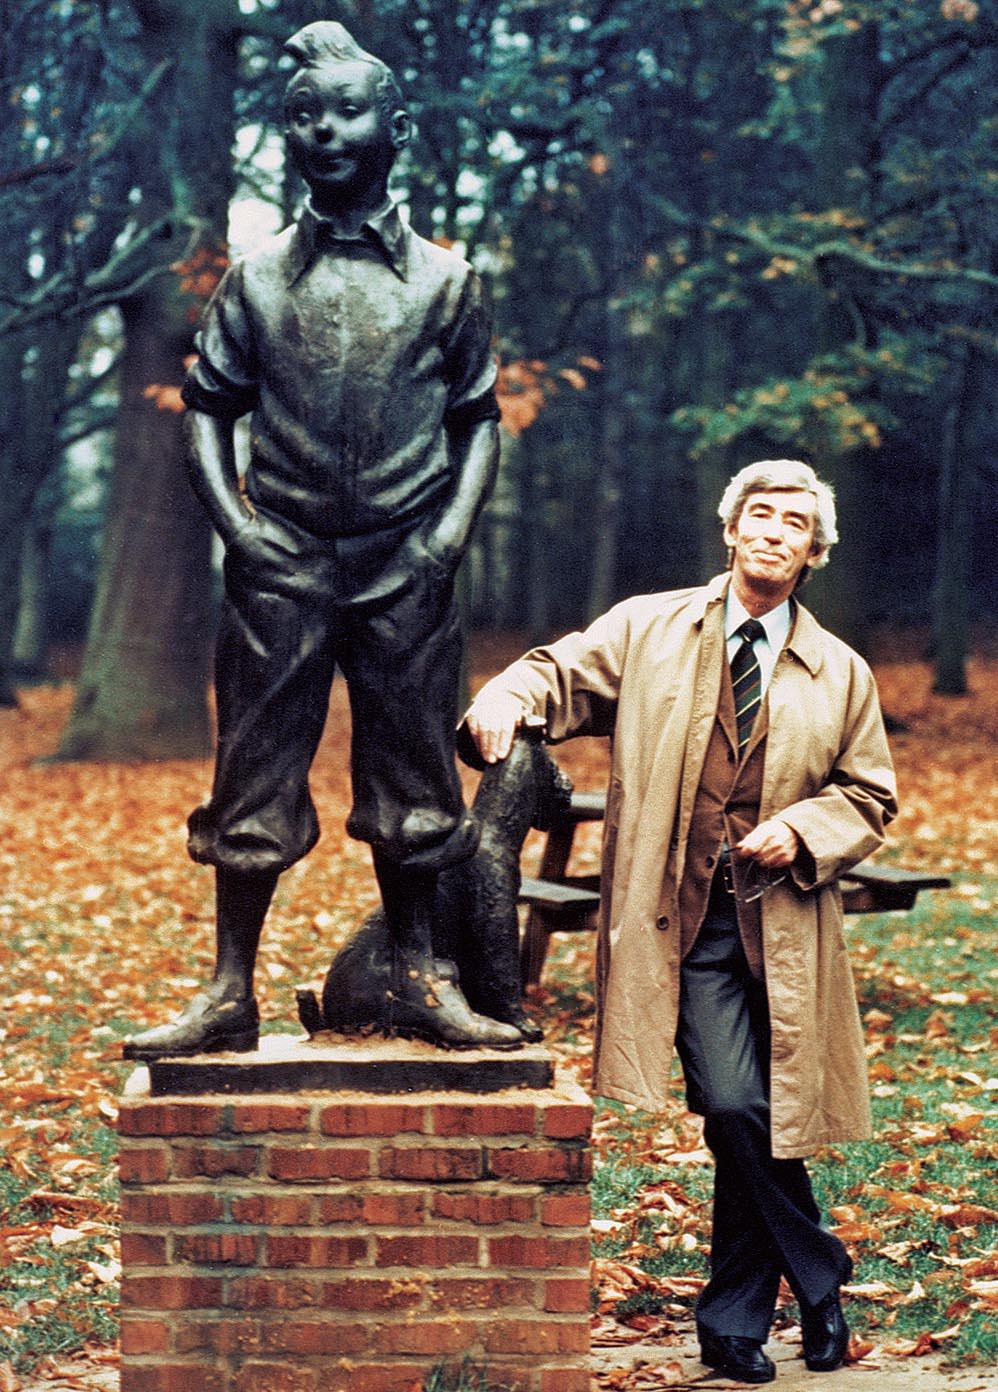 Hergé, the creator of The Adventures of Tintin, celebrating the 50th anniversary of the character, next to a bronze statue of Tintin and Snowy. Belgium, 1979.jpg